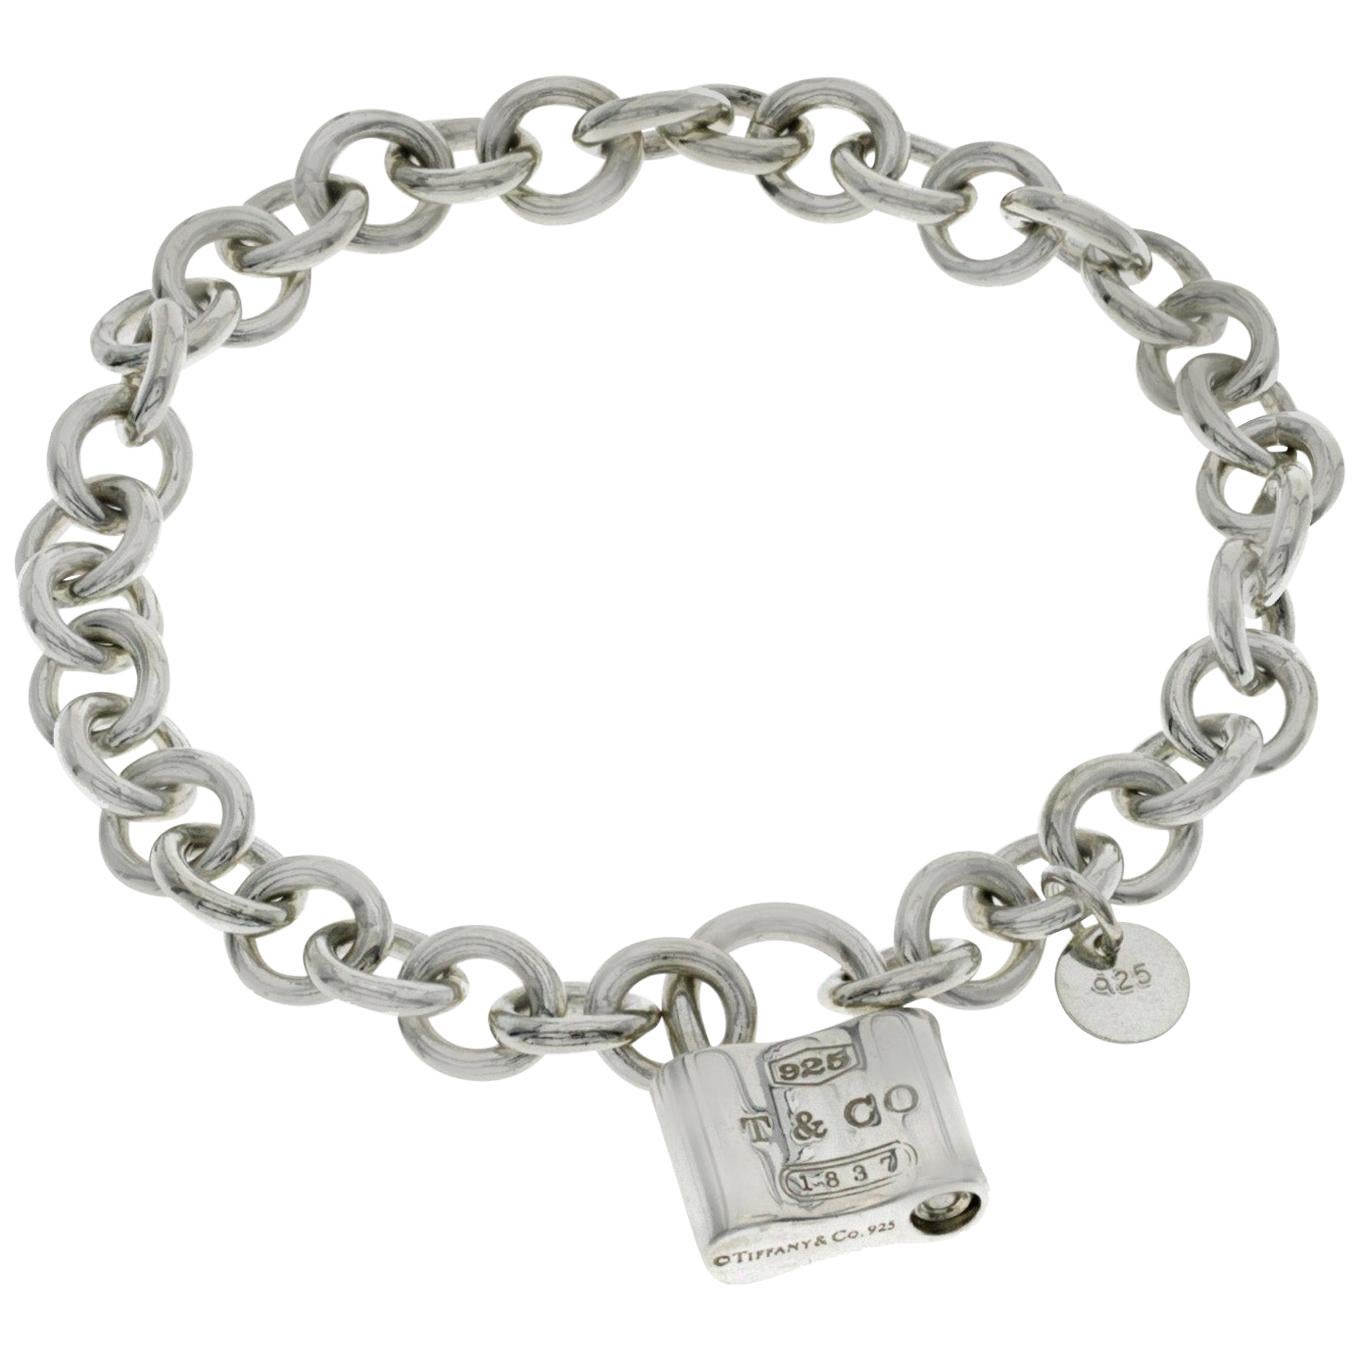 Tiffany & Co. Oval Link Clasping End Link Lock Charm Bracelet